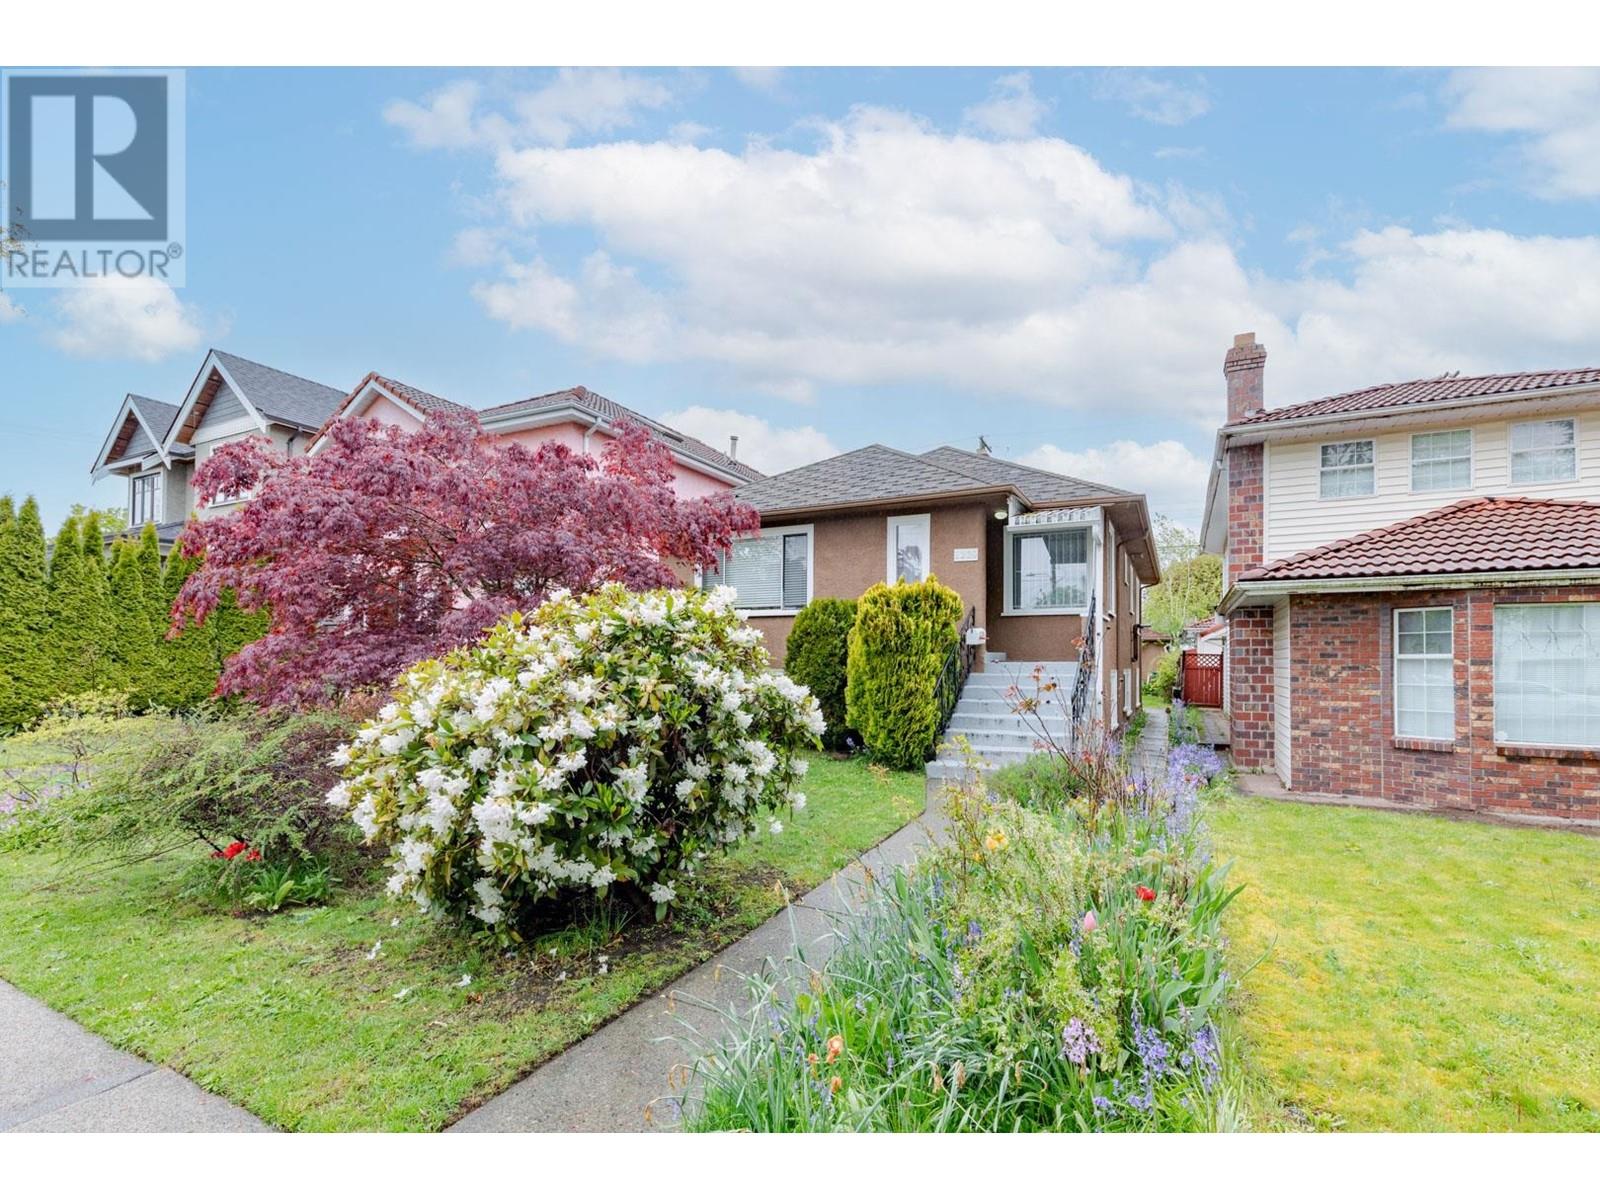 Listing Picture 2 of 37 : 1239 W 64TH AVENUE, Vancouver / 溫哥華 - 魯藝地產 Yvonne Lu Group - MLS Medallion Club Member